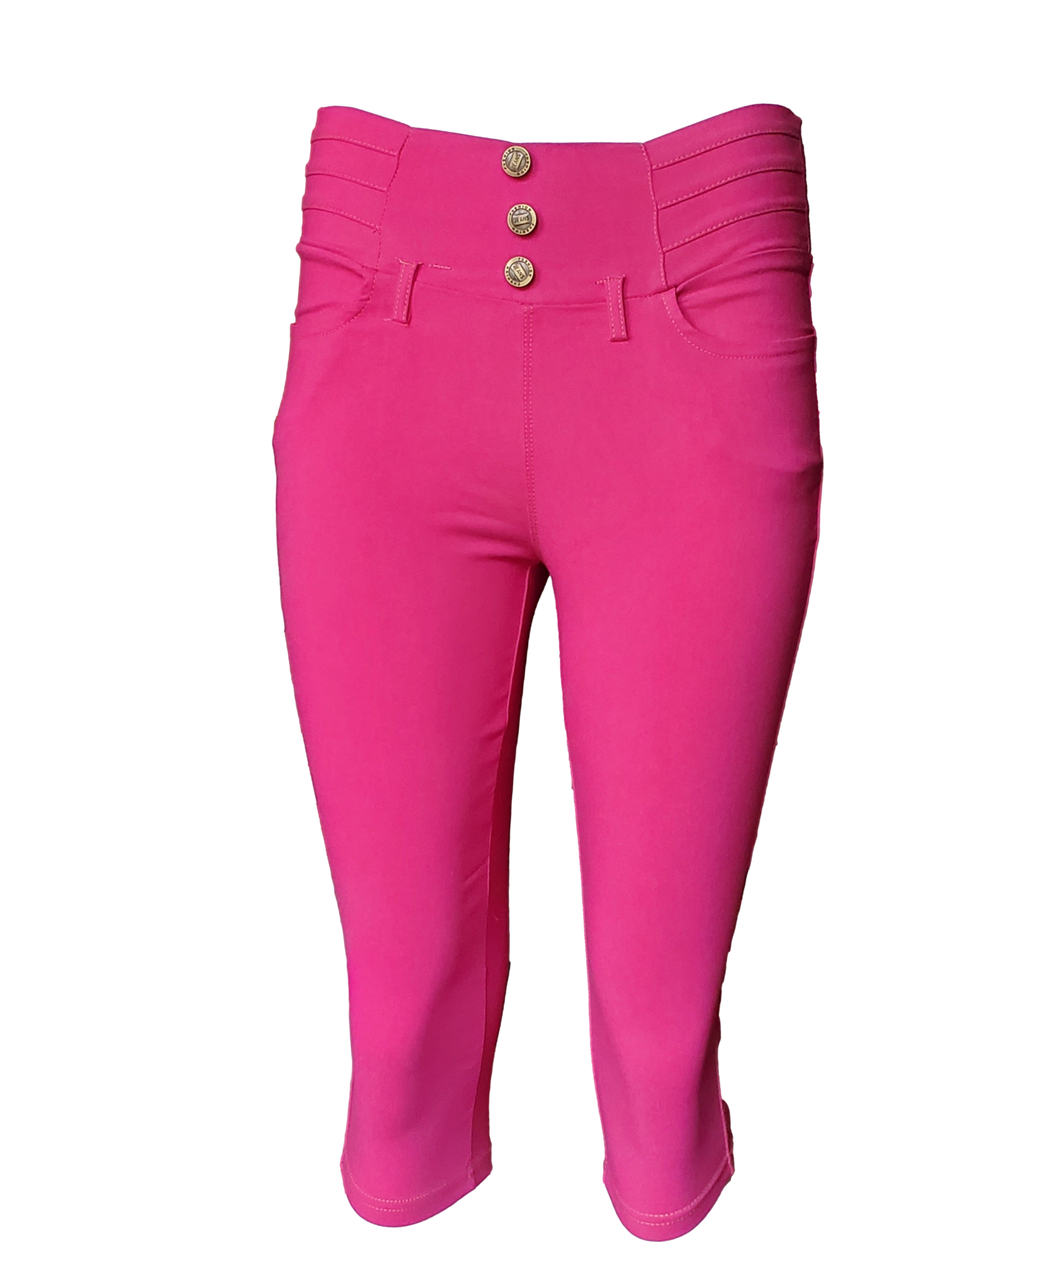 Women's Pink Comfy and Versatile Capri Stretch Jeggings